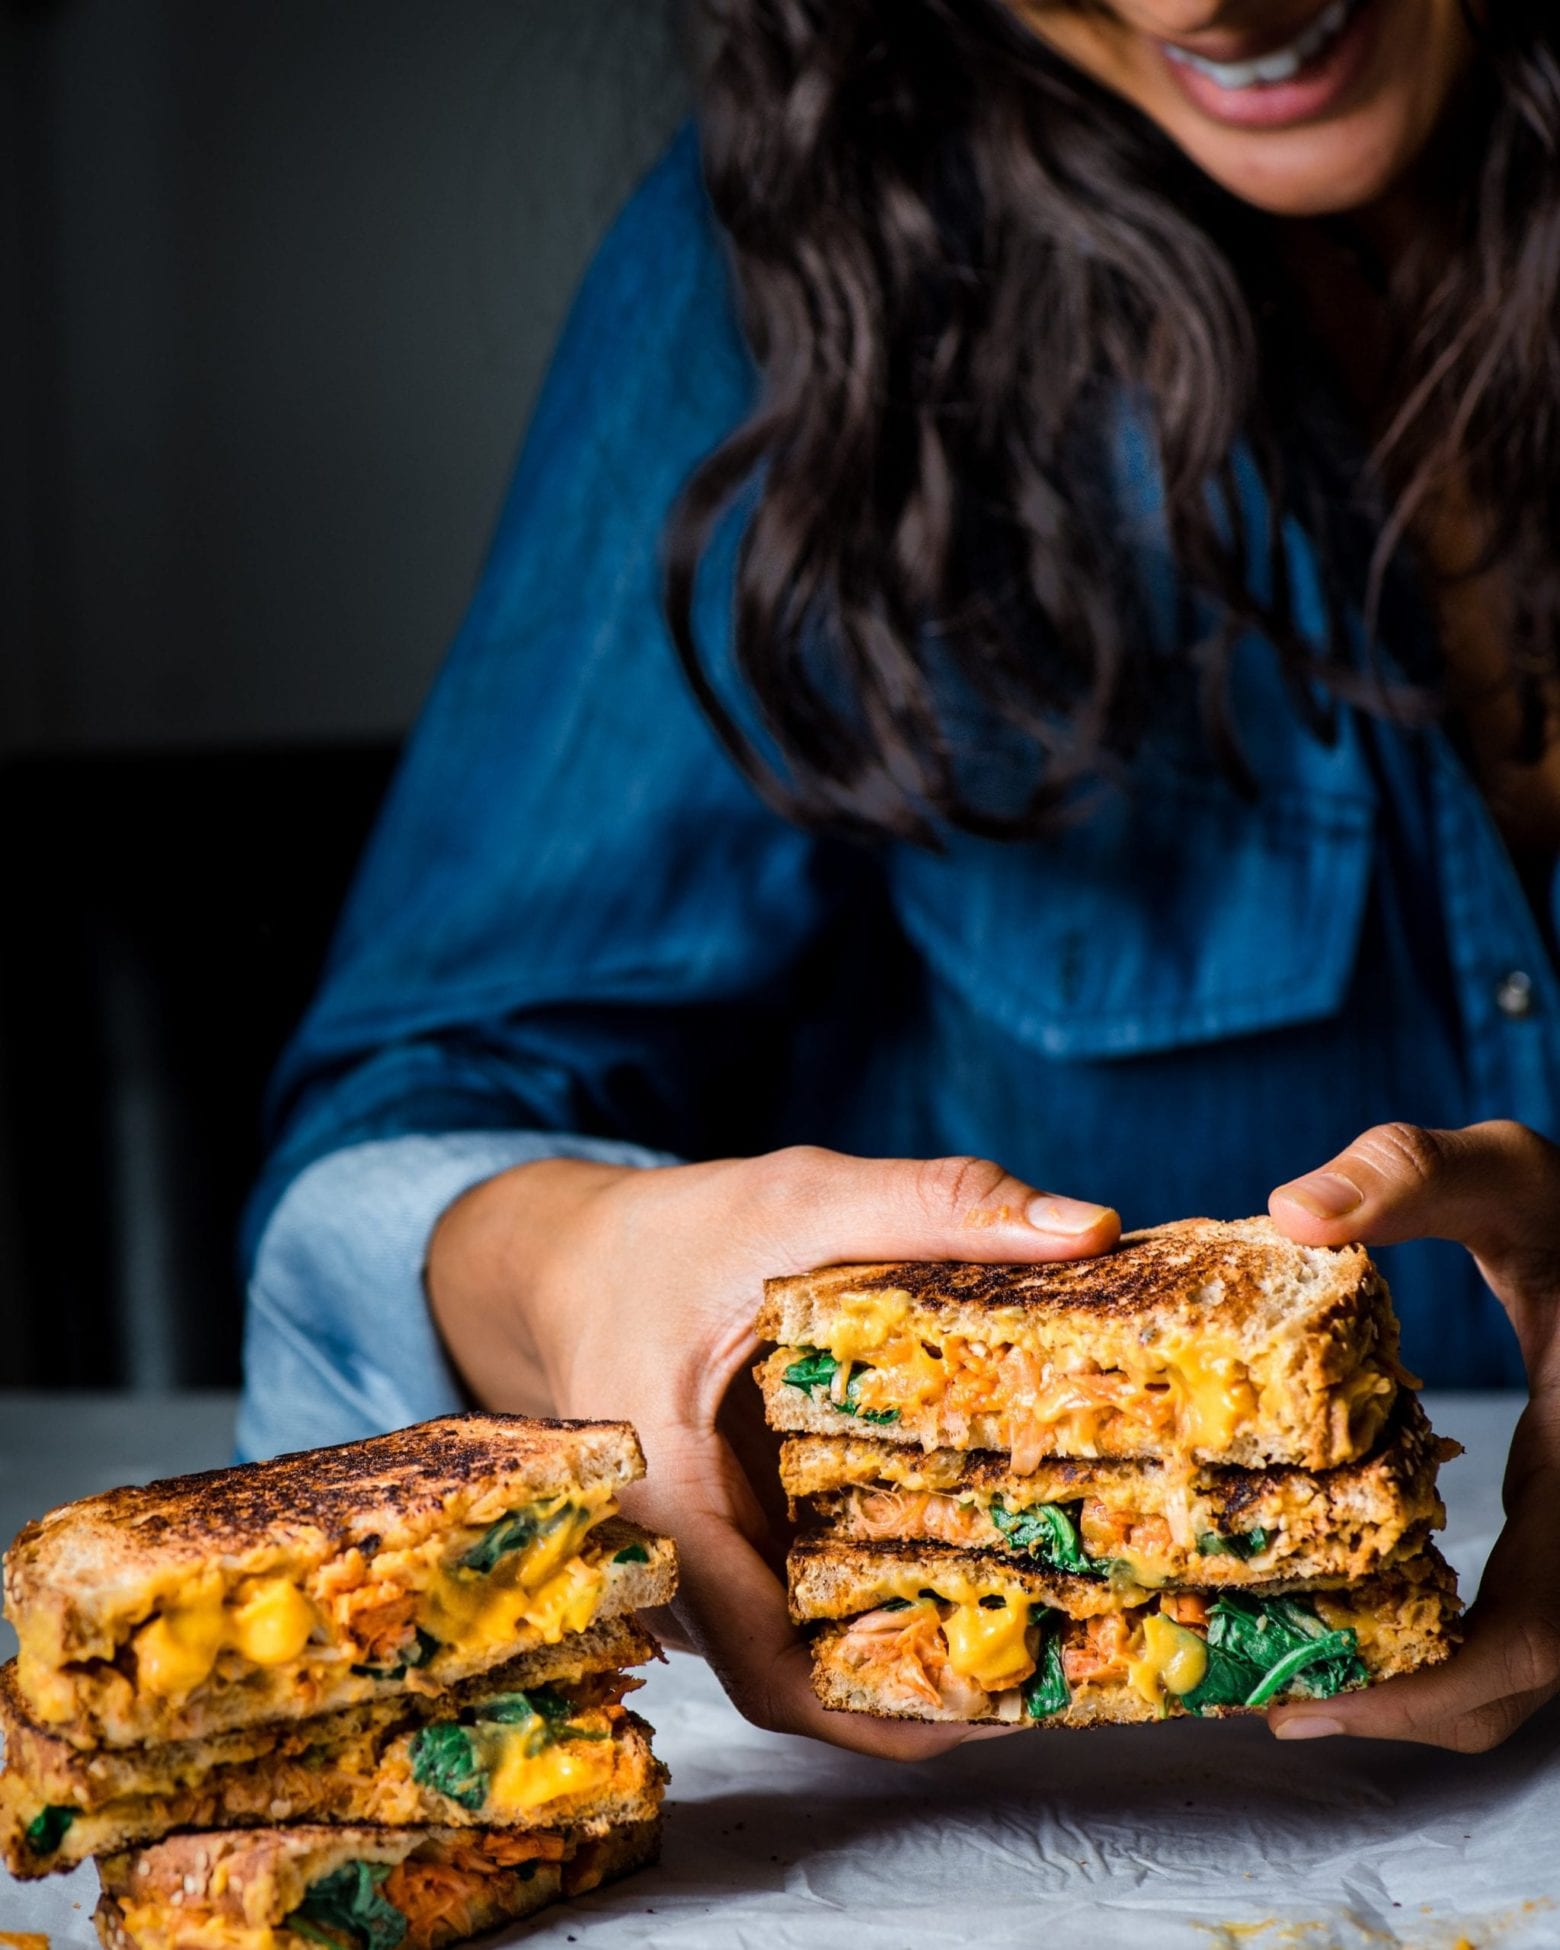 Woman holding cut in half vegan grilled cheese sandwich over a table.